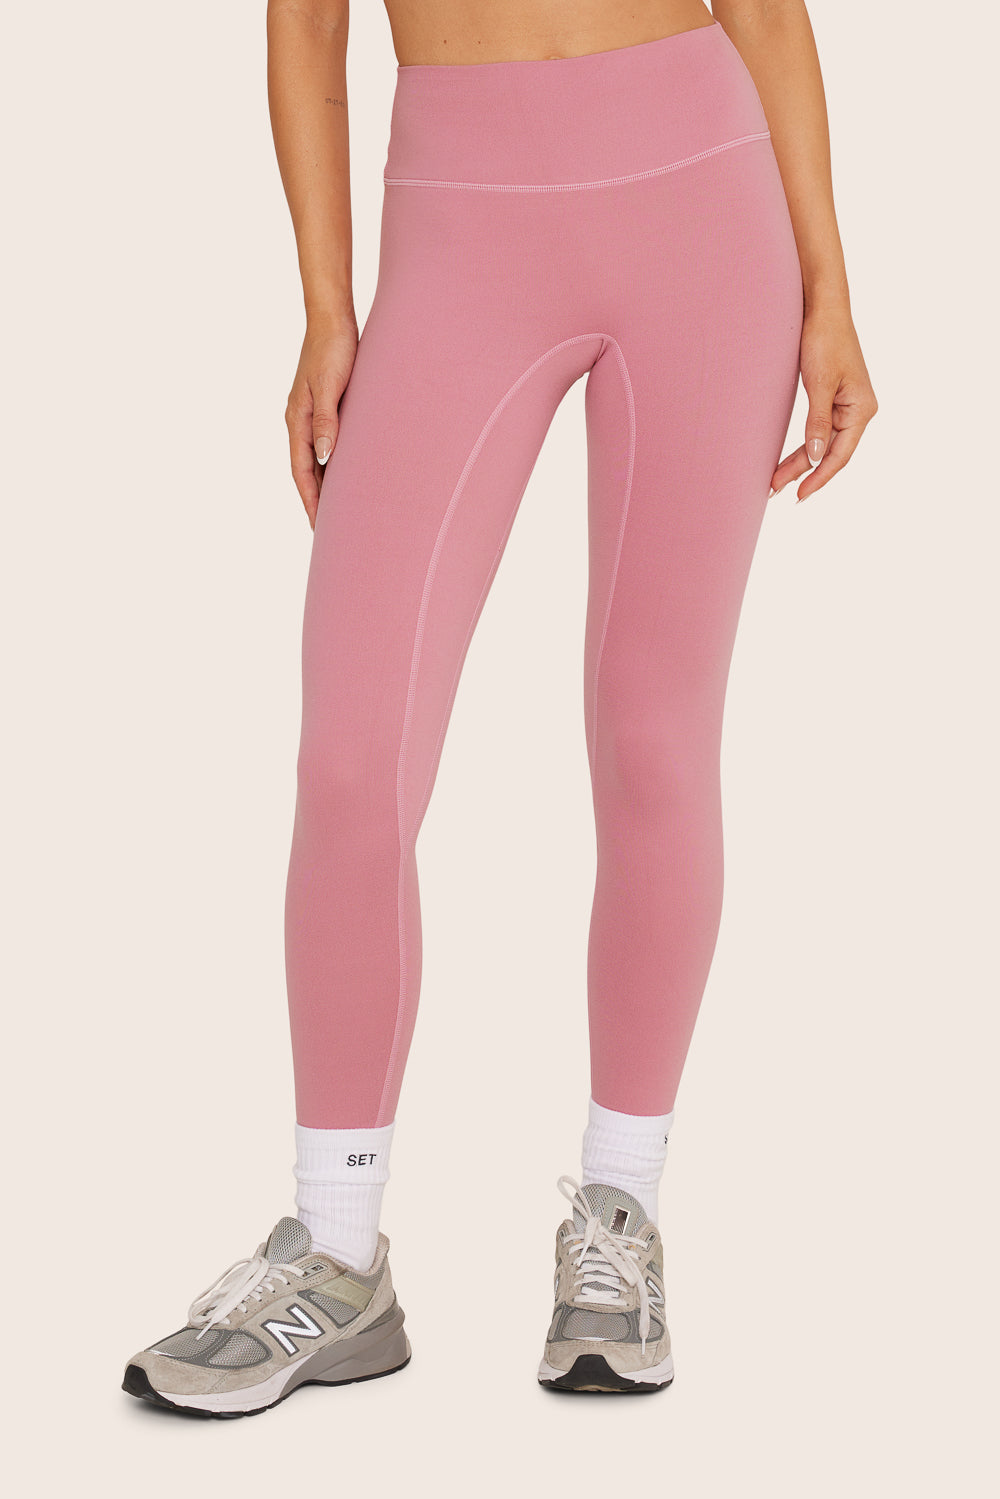 FORMCLOUD® LEGGINGS - GLOSS Featured Image